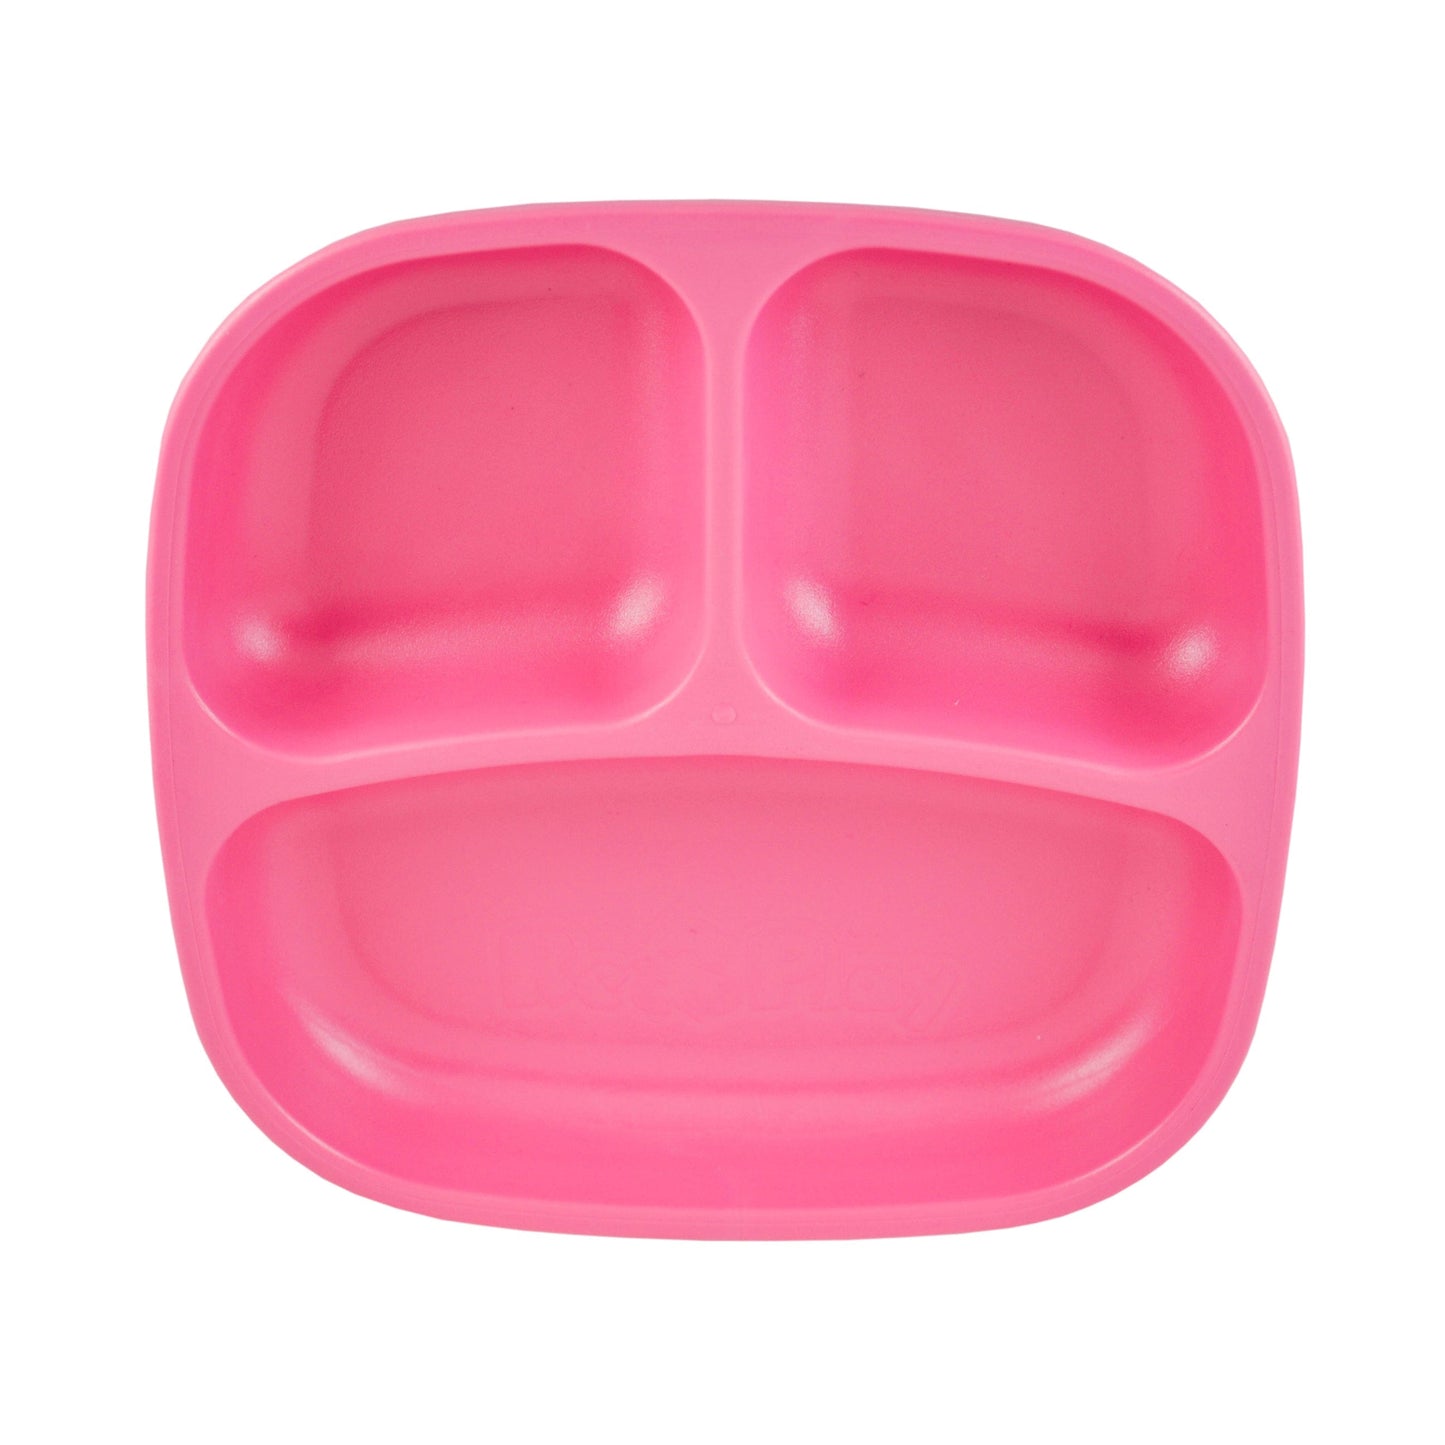 Re-Play Divided Plate Bright Pink RP-SP-PlateDiv-BrightPink